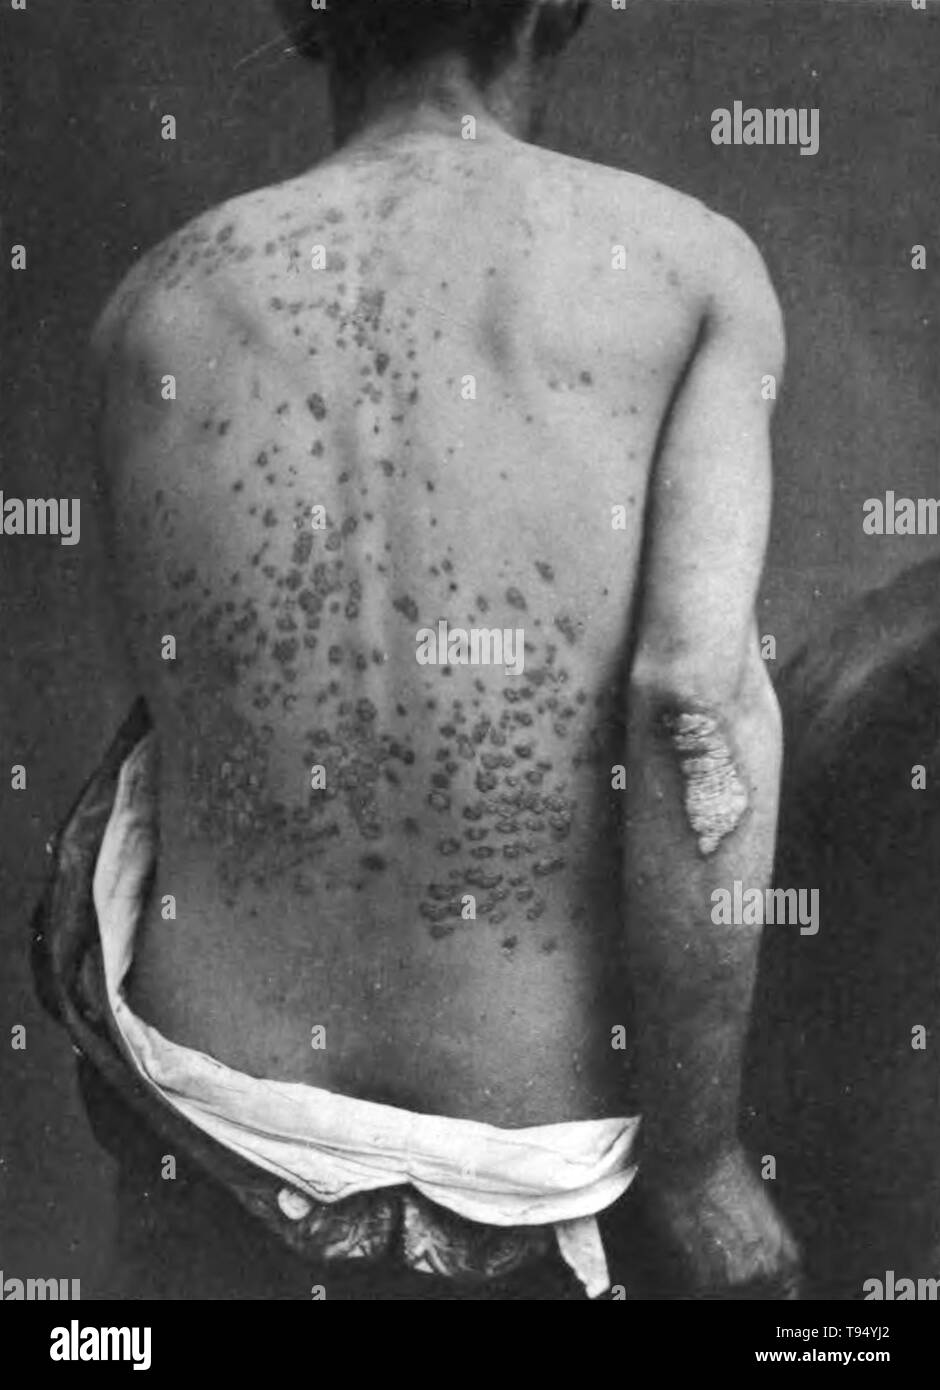 Guttate psoriasis on the back and arm of a man. Guttate psoriasis is a type of psoriasis that looks like small, salmon-pink drops on the skin. The word guttate is derived from the Latin word gutta, meaning drop. Photographed by George Henry Fox, 1886. Stock Photo